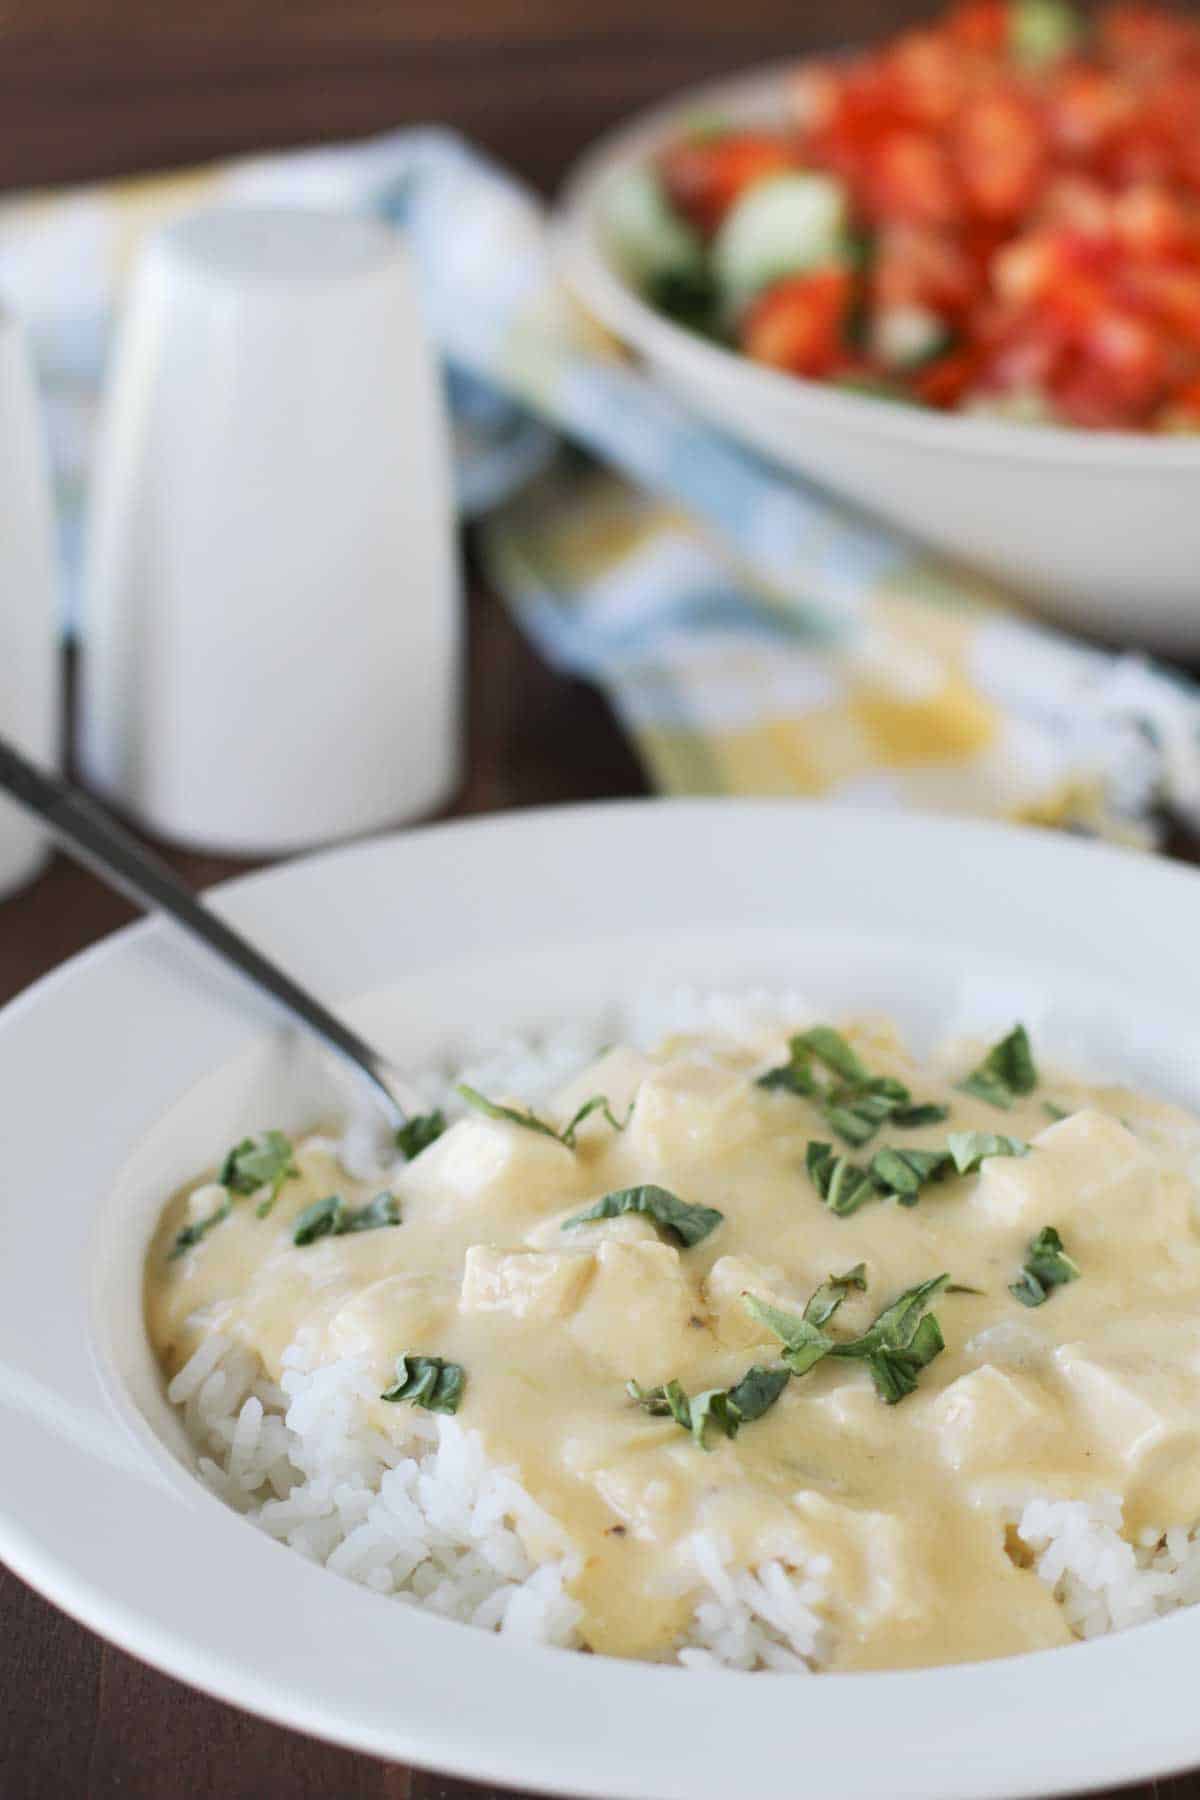 Cheesy Sour Cream Chicken served over rice and topped with basil.